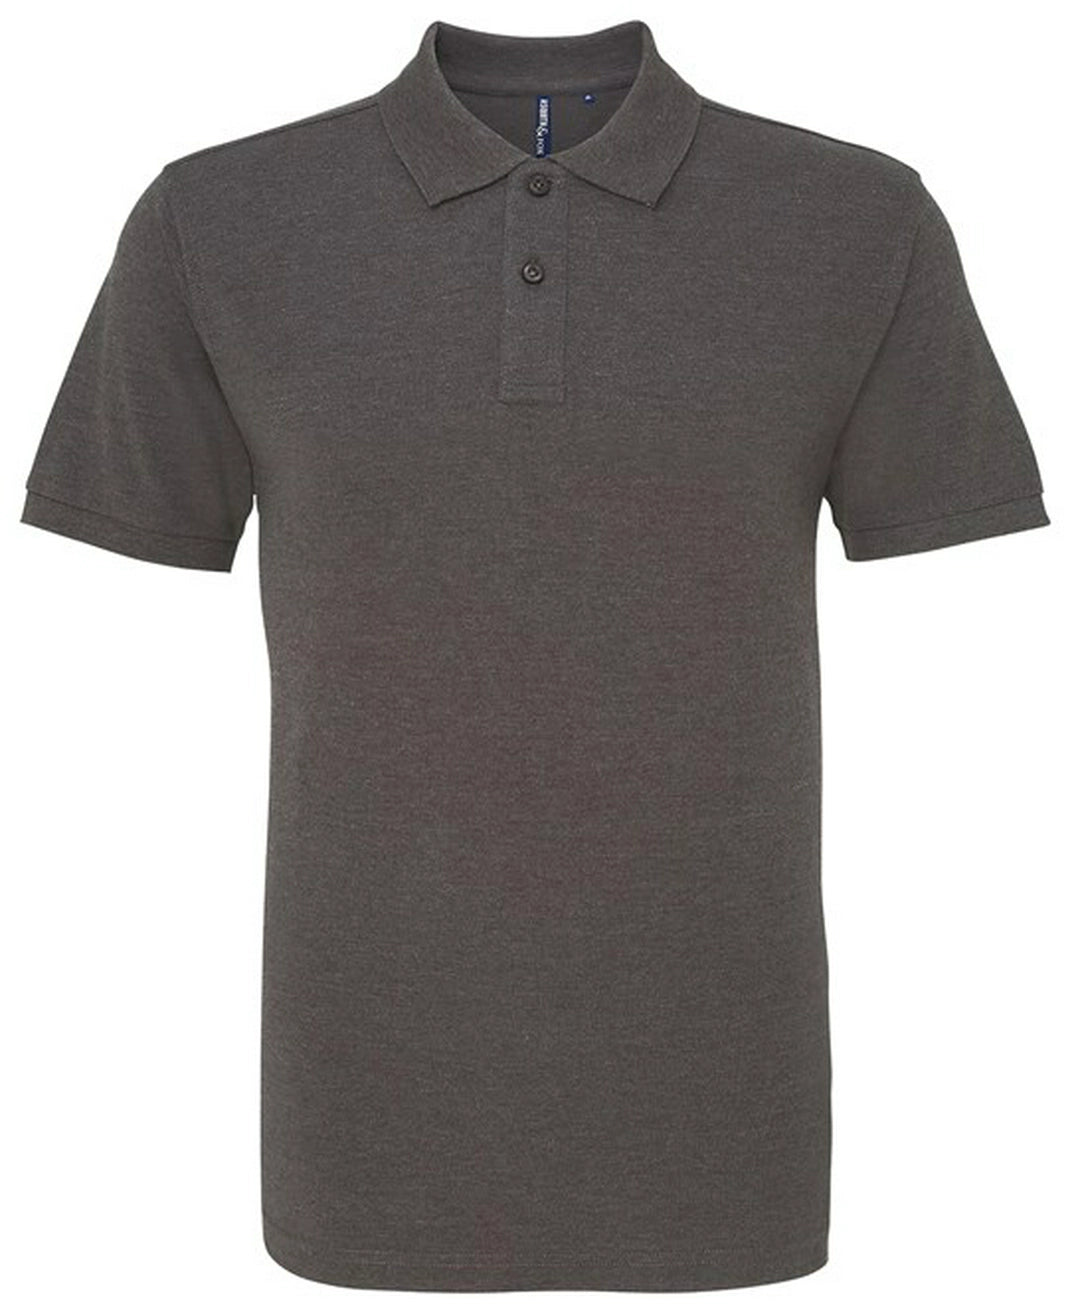 MENS CLASSIC FIT COTTON POLO Rich color - COOZO